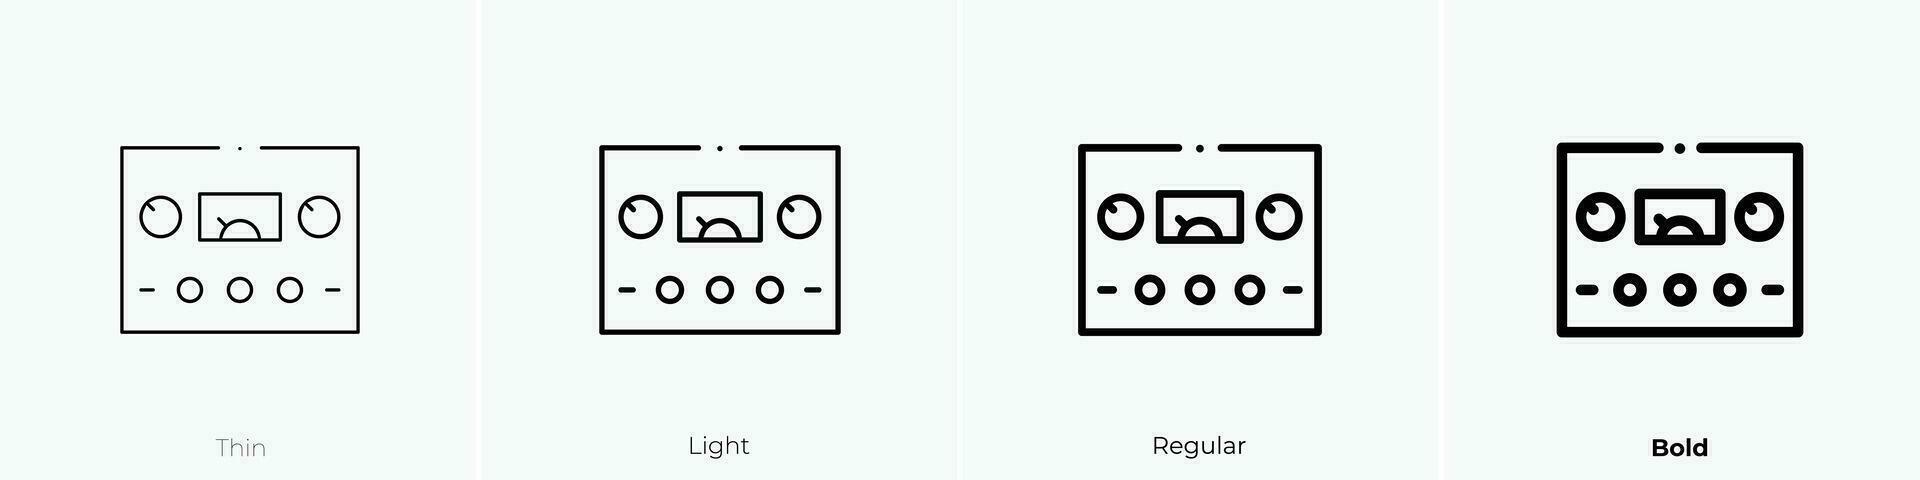 power supply icon. Thin, Light, Regular And Bold style design isolated on white background vector